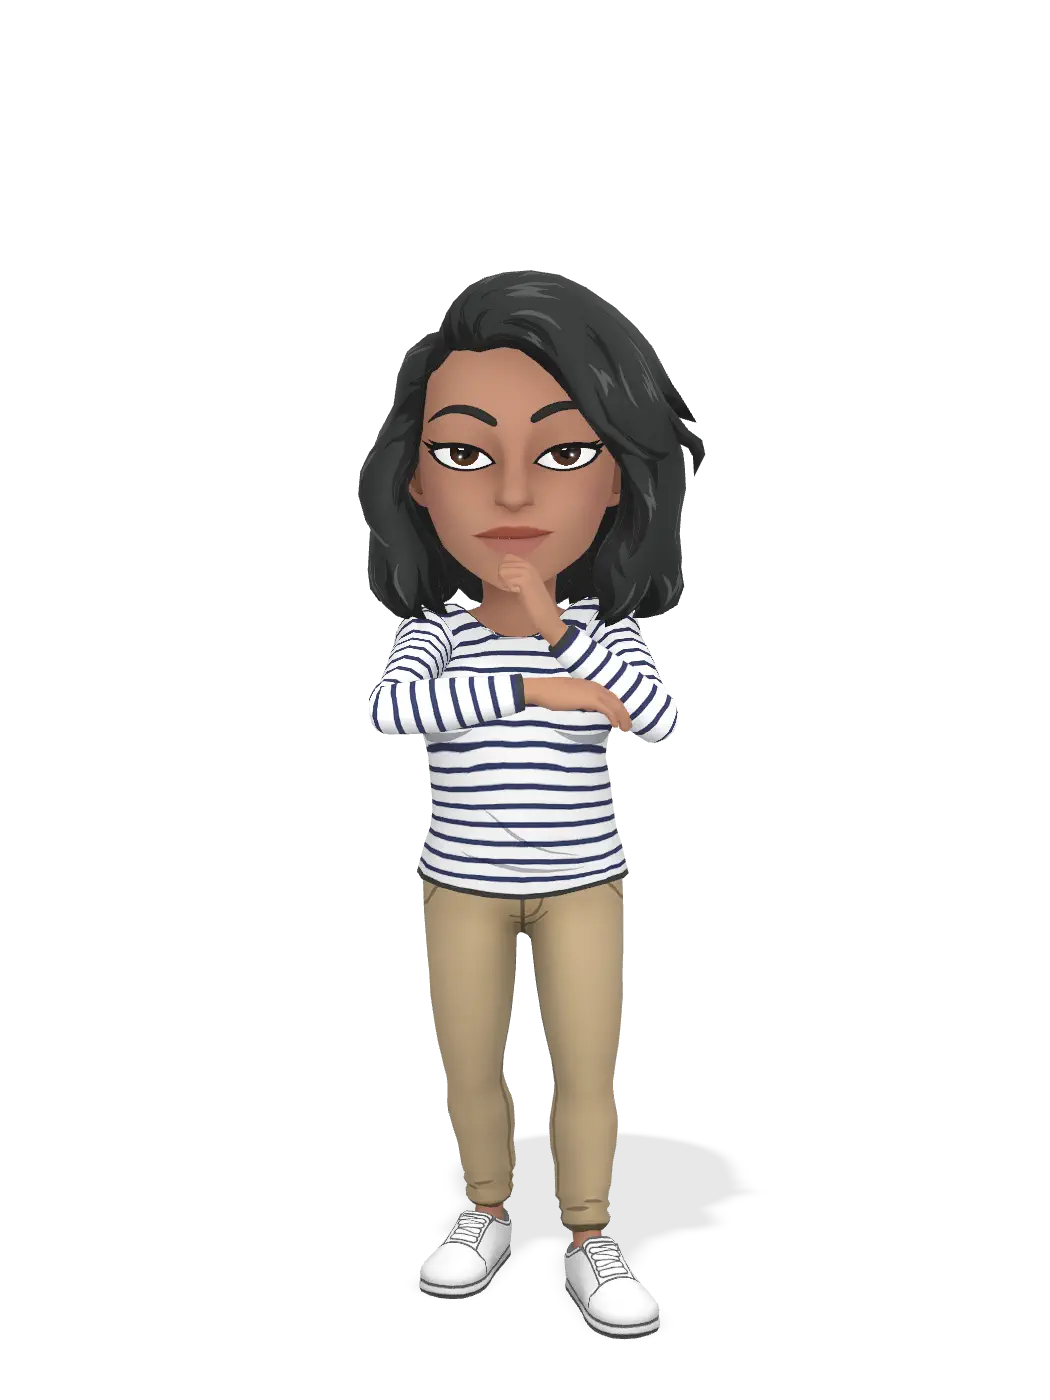 3D Bitmoji for frenchfoodieind